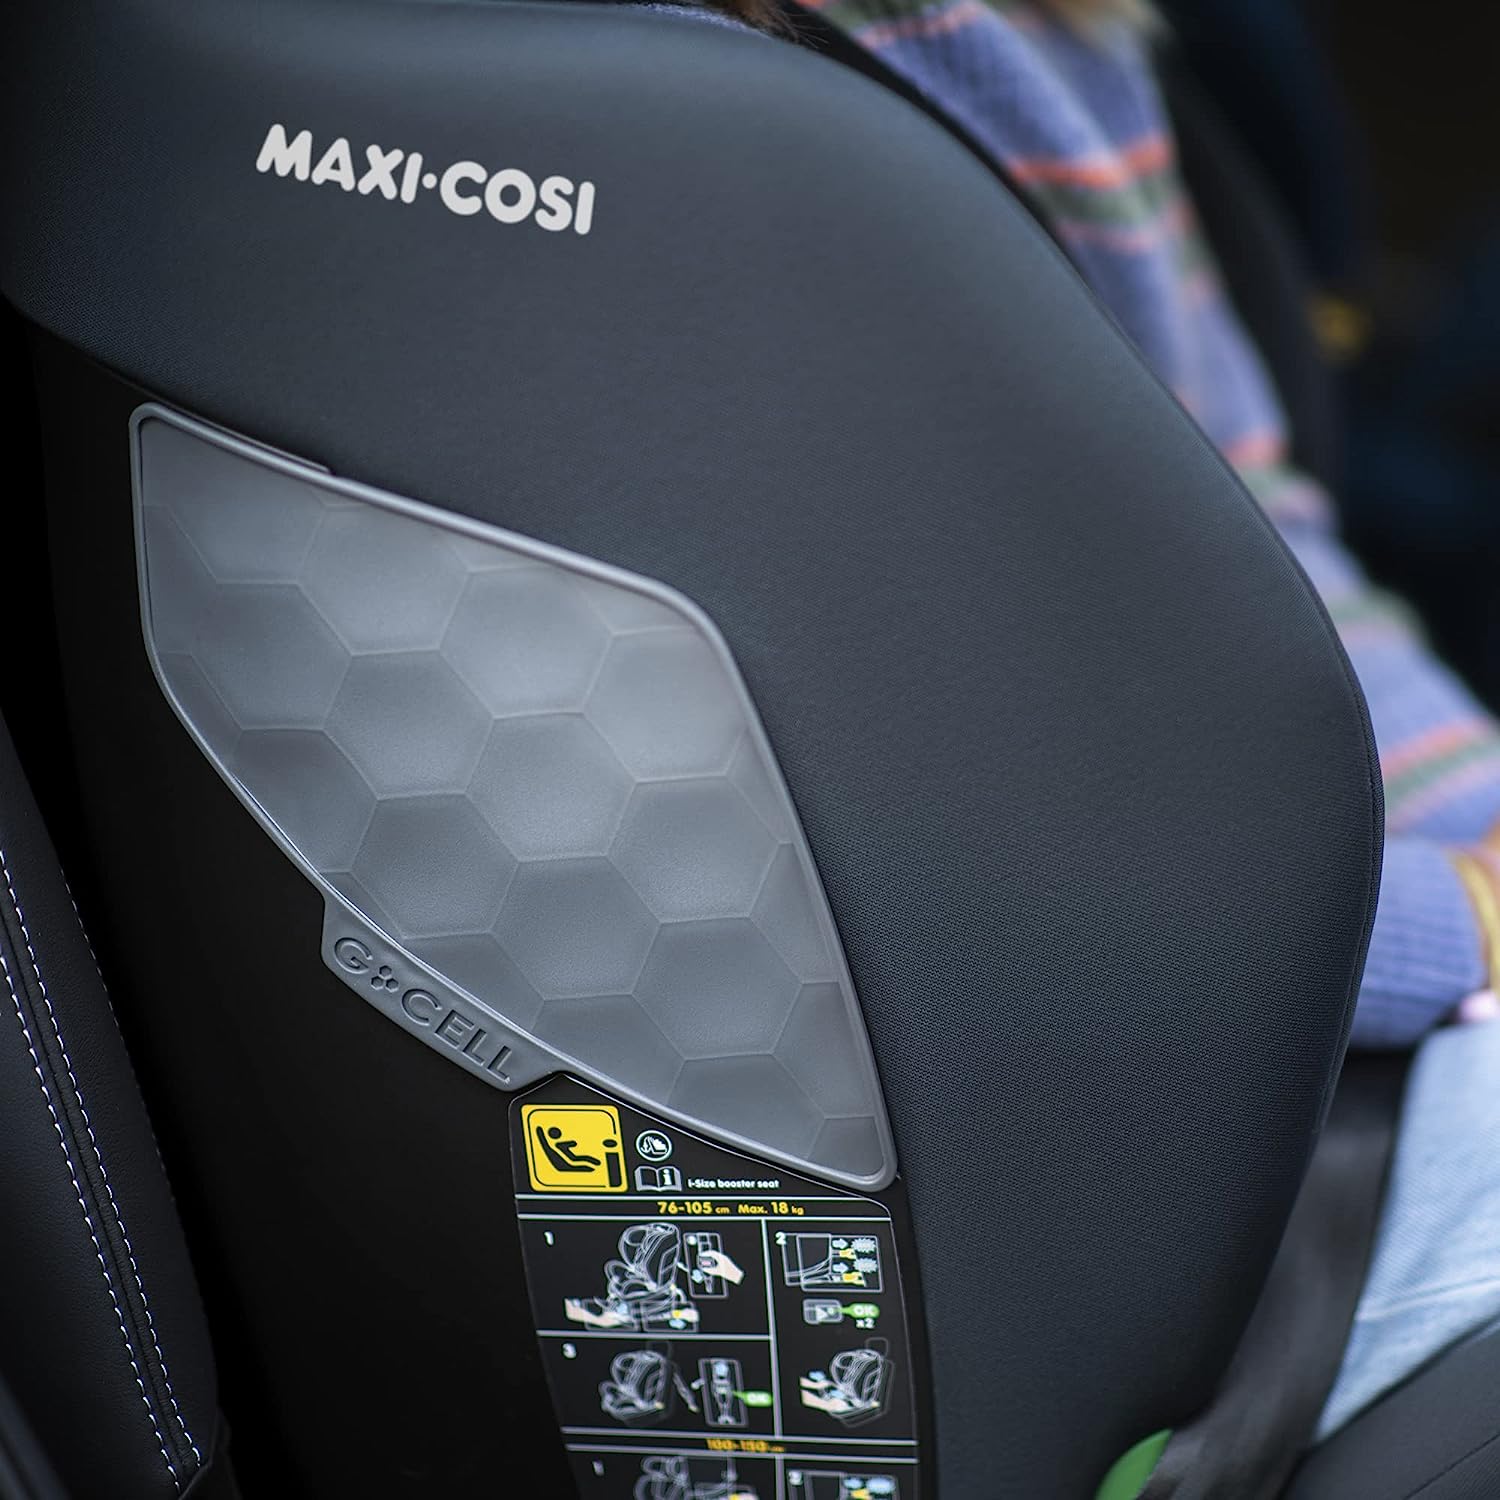 Maxi-Cosi Titan i-Size Growing Child Seat 15 Months - 12 Years 76 - 150 cm ISOFIX Child Seat, G-CELL Side Impact Protection, 5 Lying Positions, Adjustable Headrest, Basic Grey